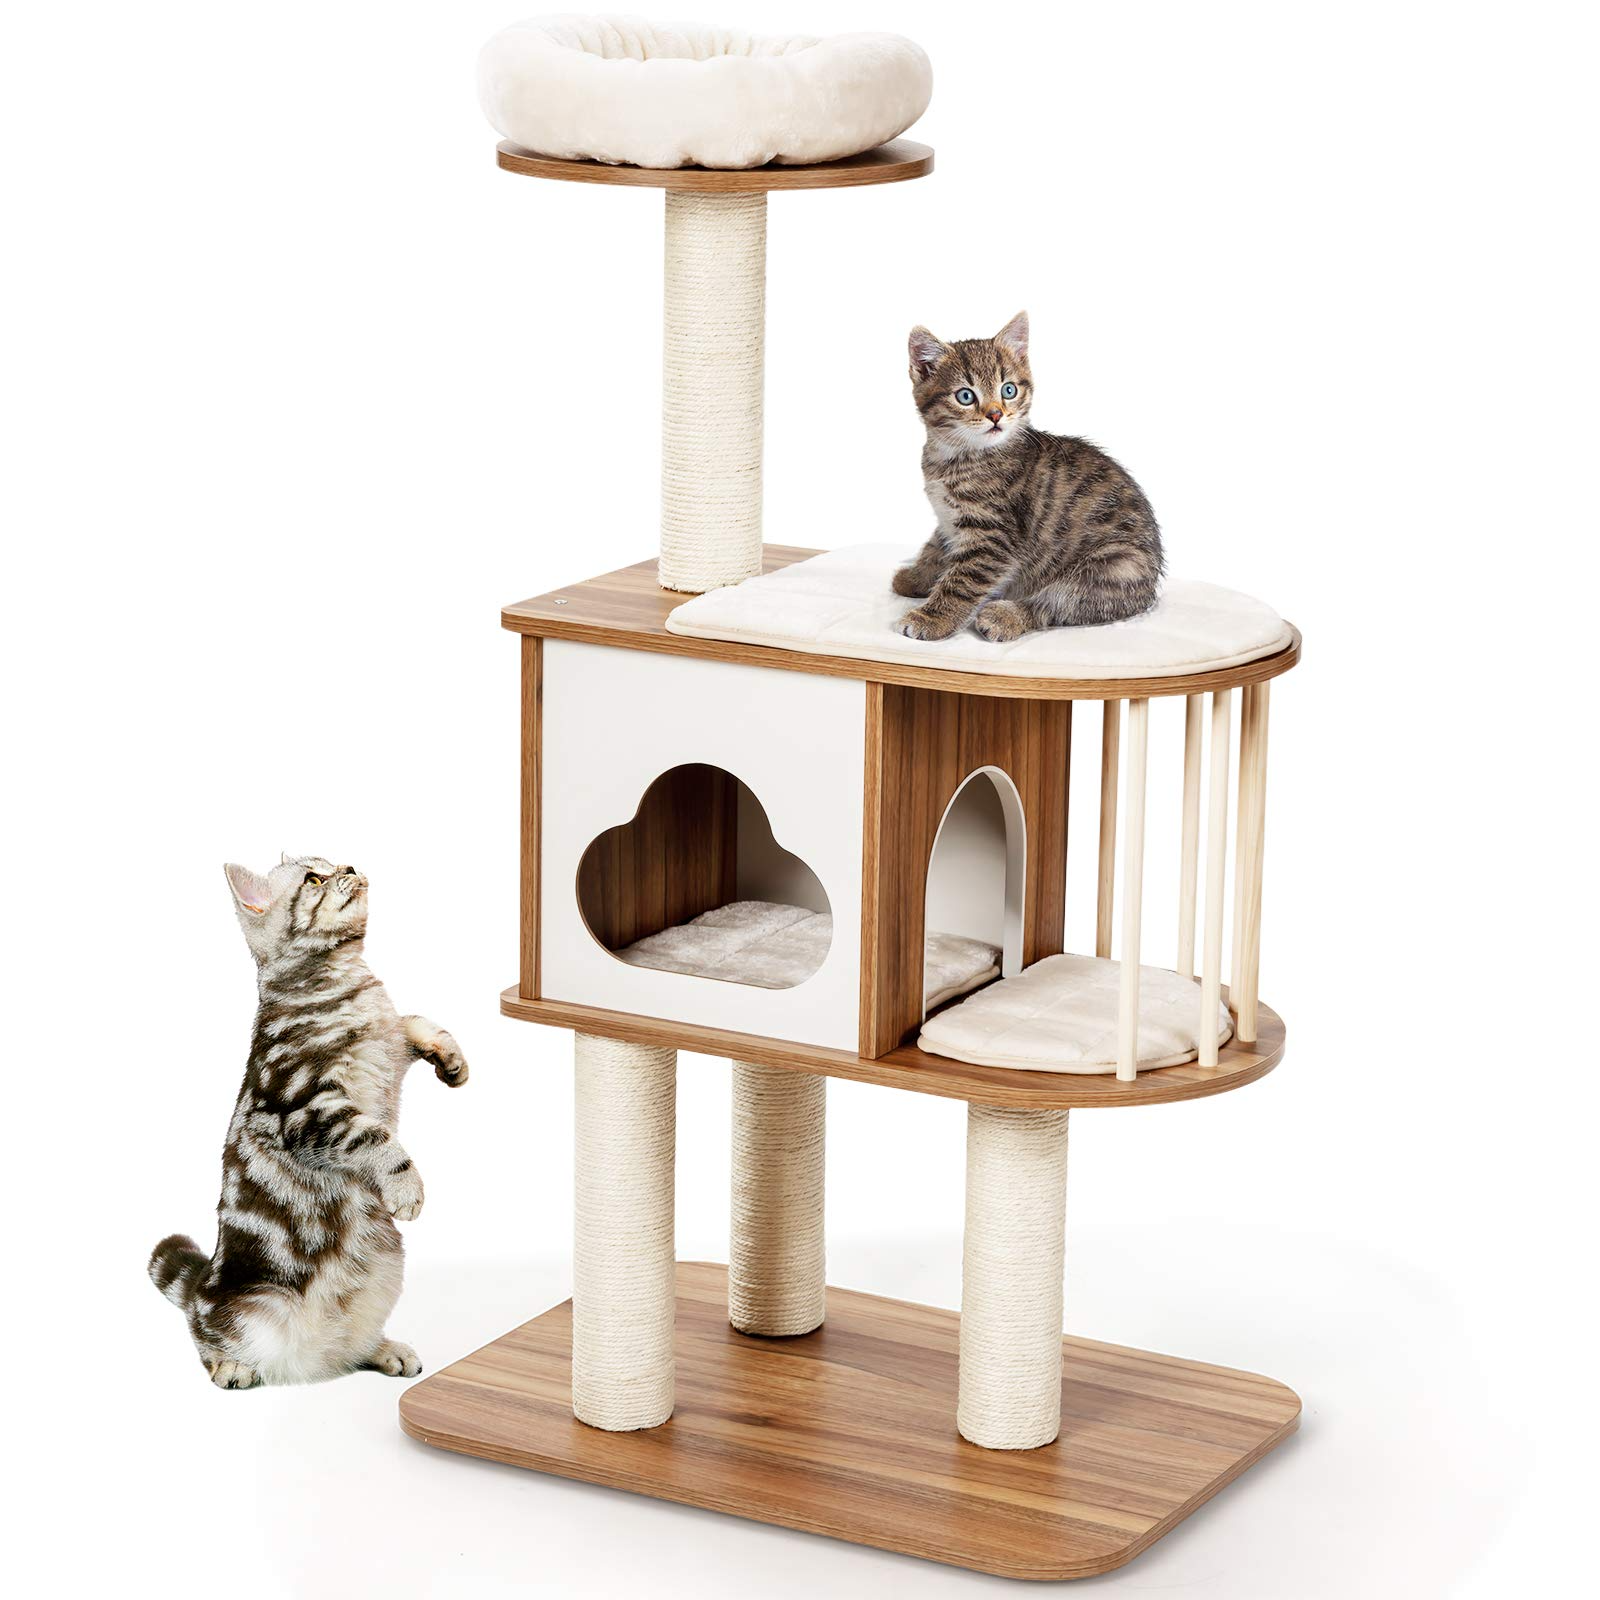 Tangkula Modern Wood Cat Tree, 46 Inches Cat Tower with Platform, Cat Activity Center with Scratching Posts and Washable Cushions